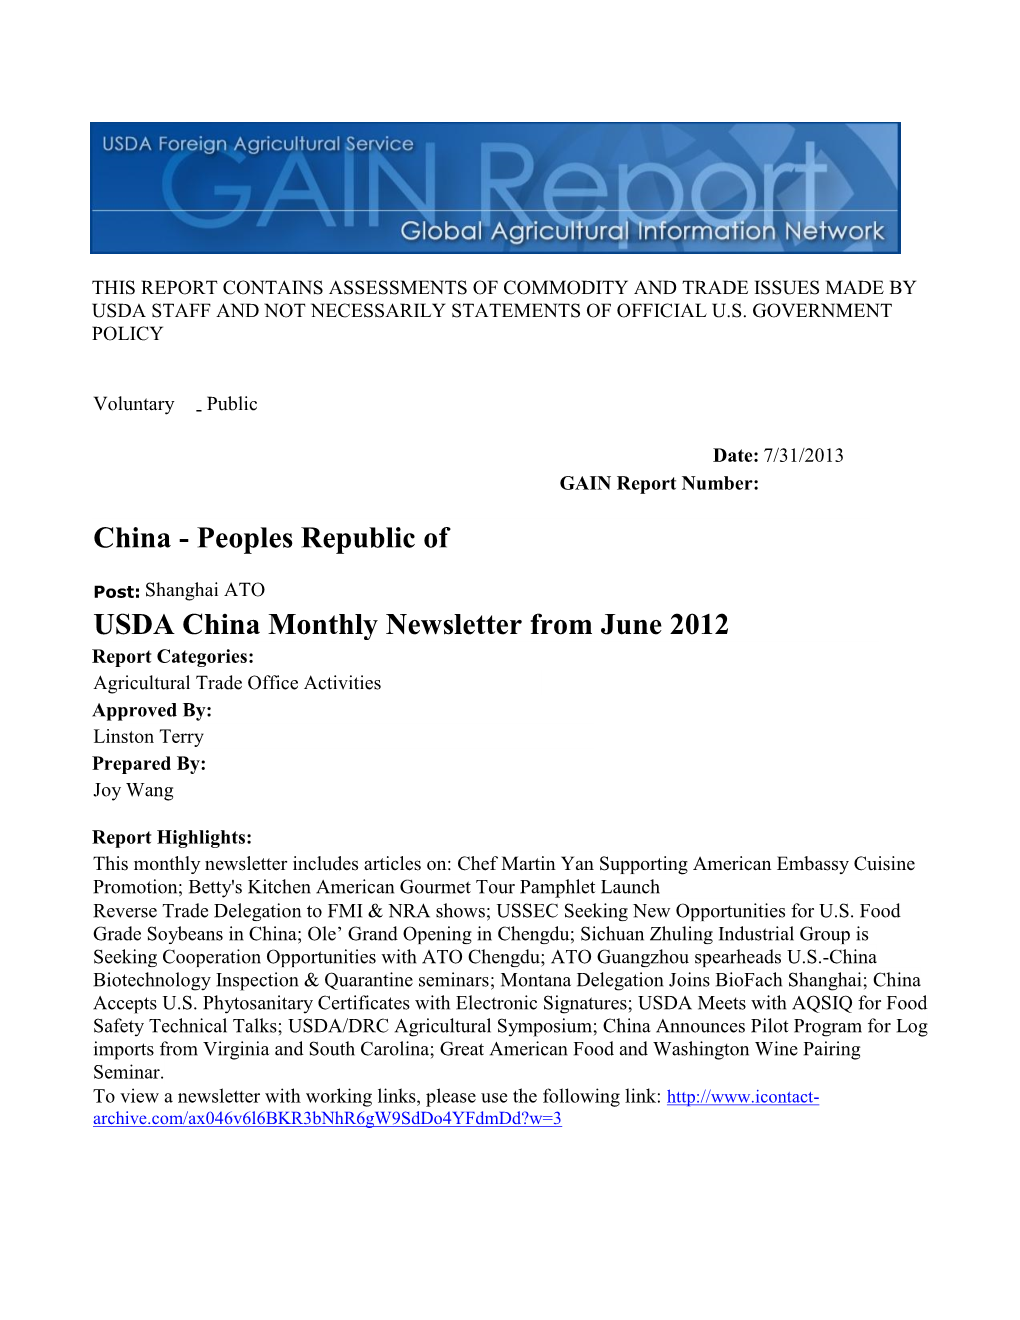 USDA China Monthly Newsletter from June 2012 China